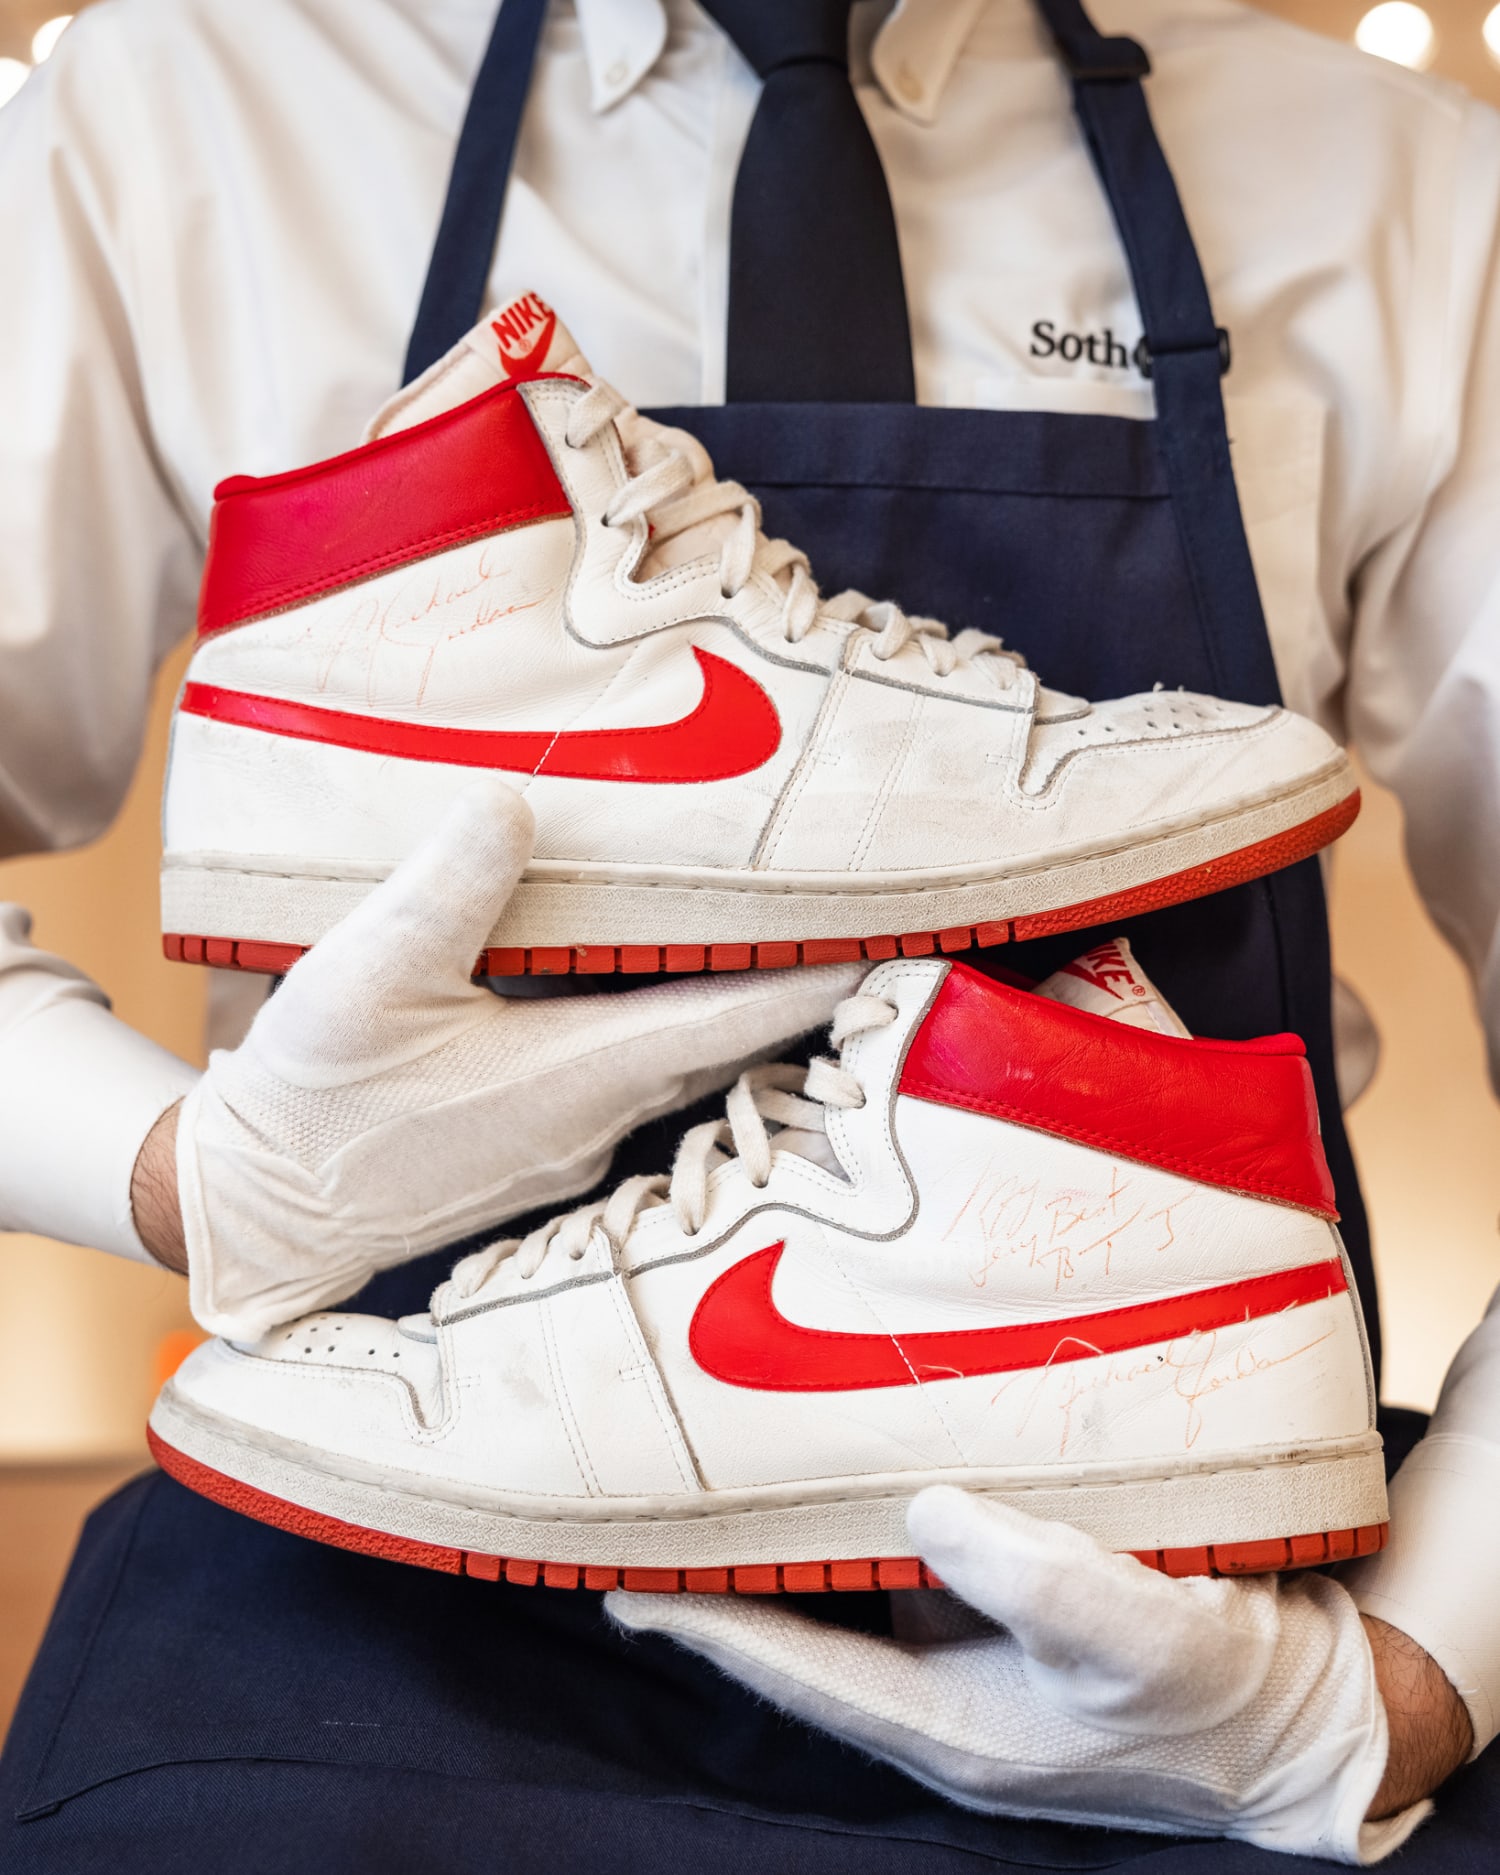 processing Rose Robe Michael Jordan's 1984 Nike Air Ships sell for record $1.5M at Sotheby's